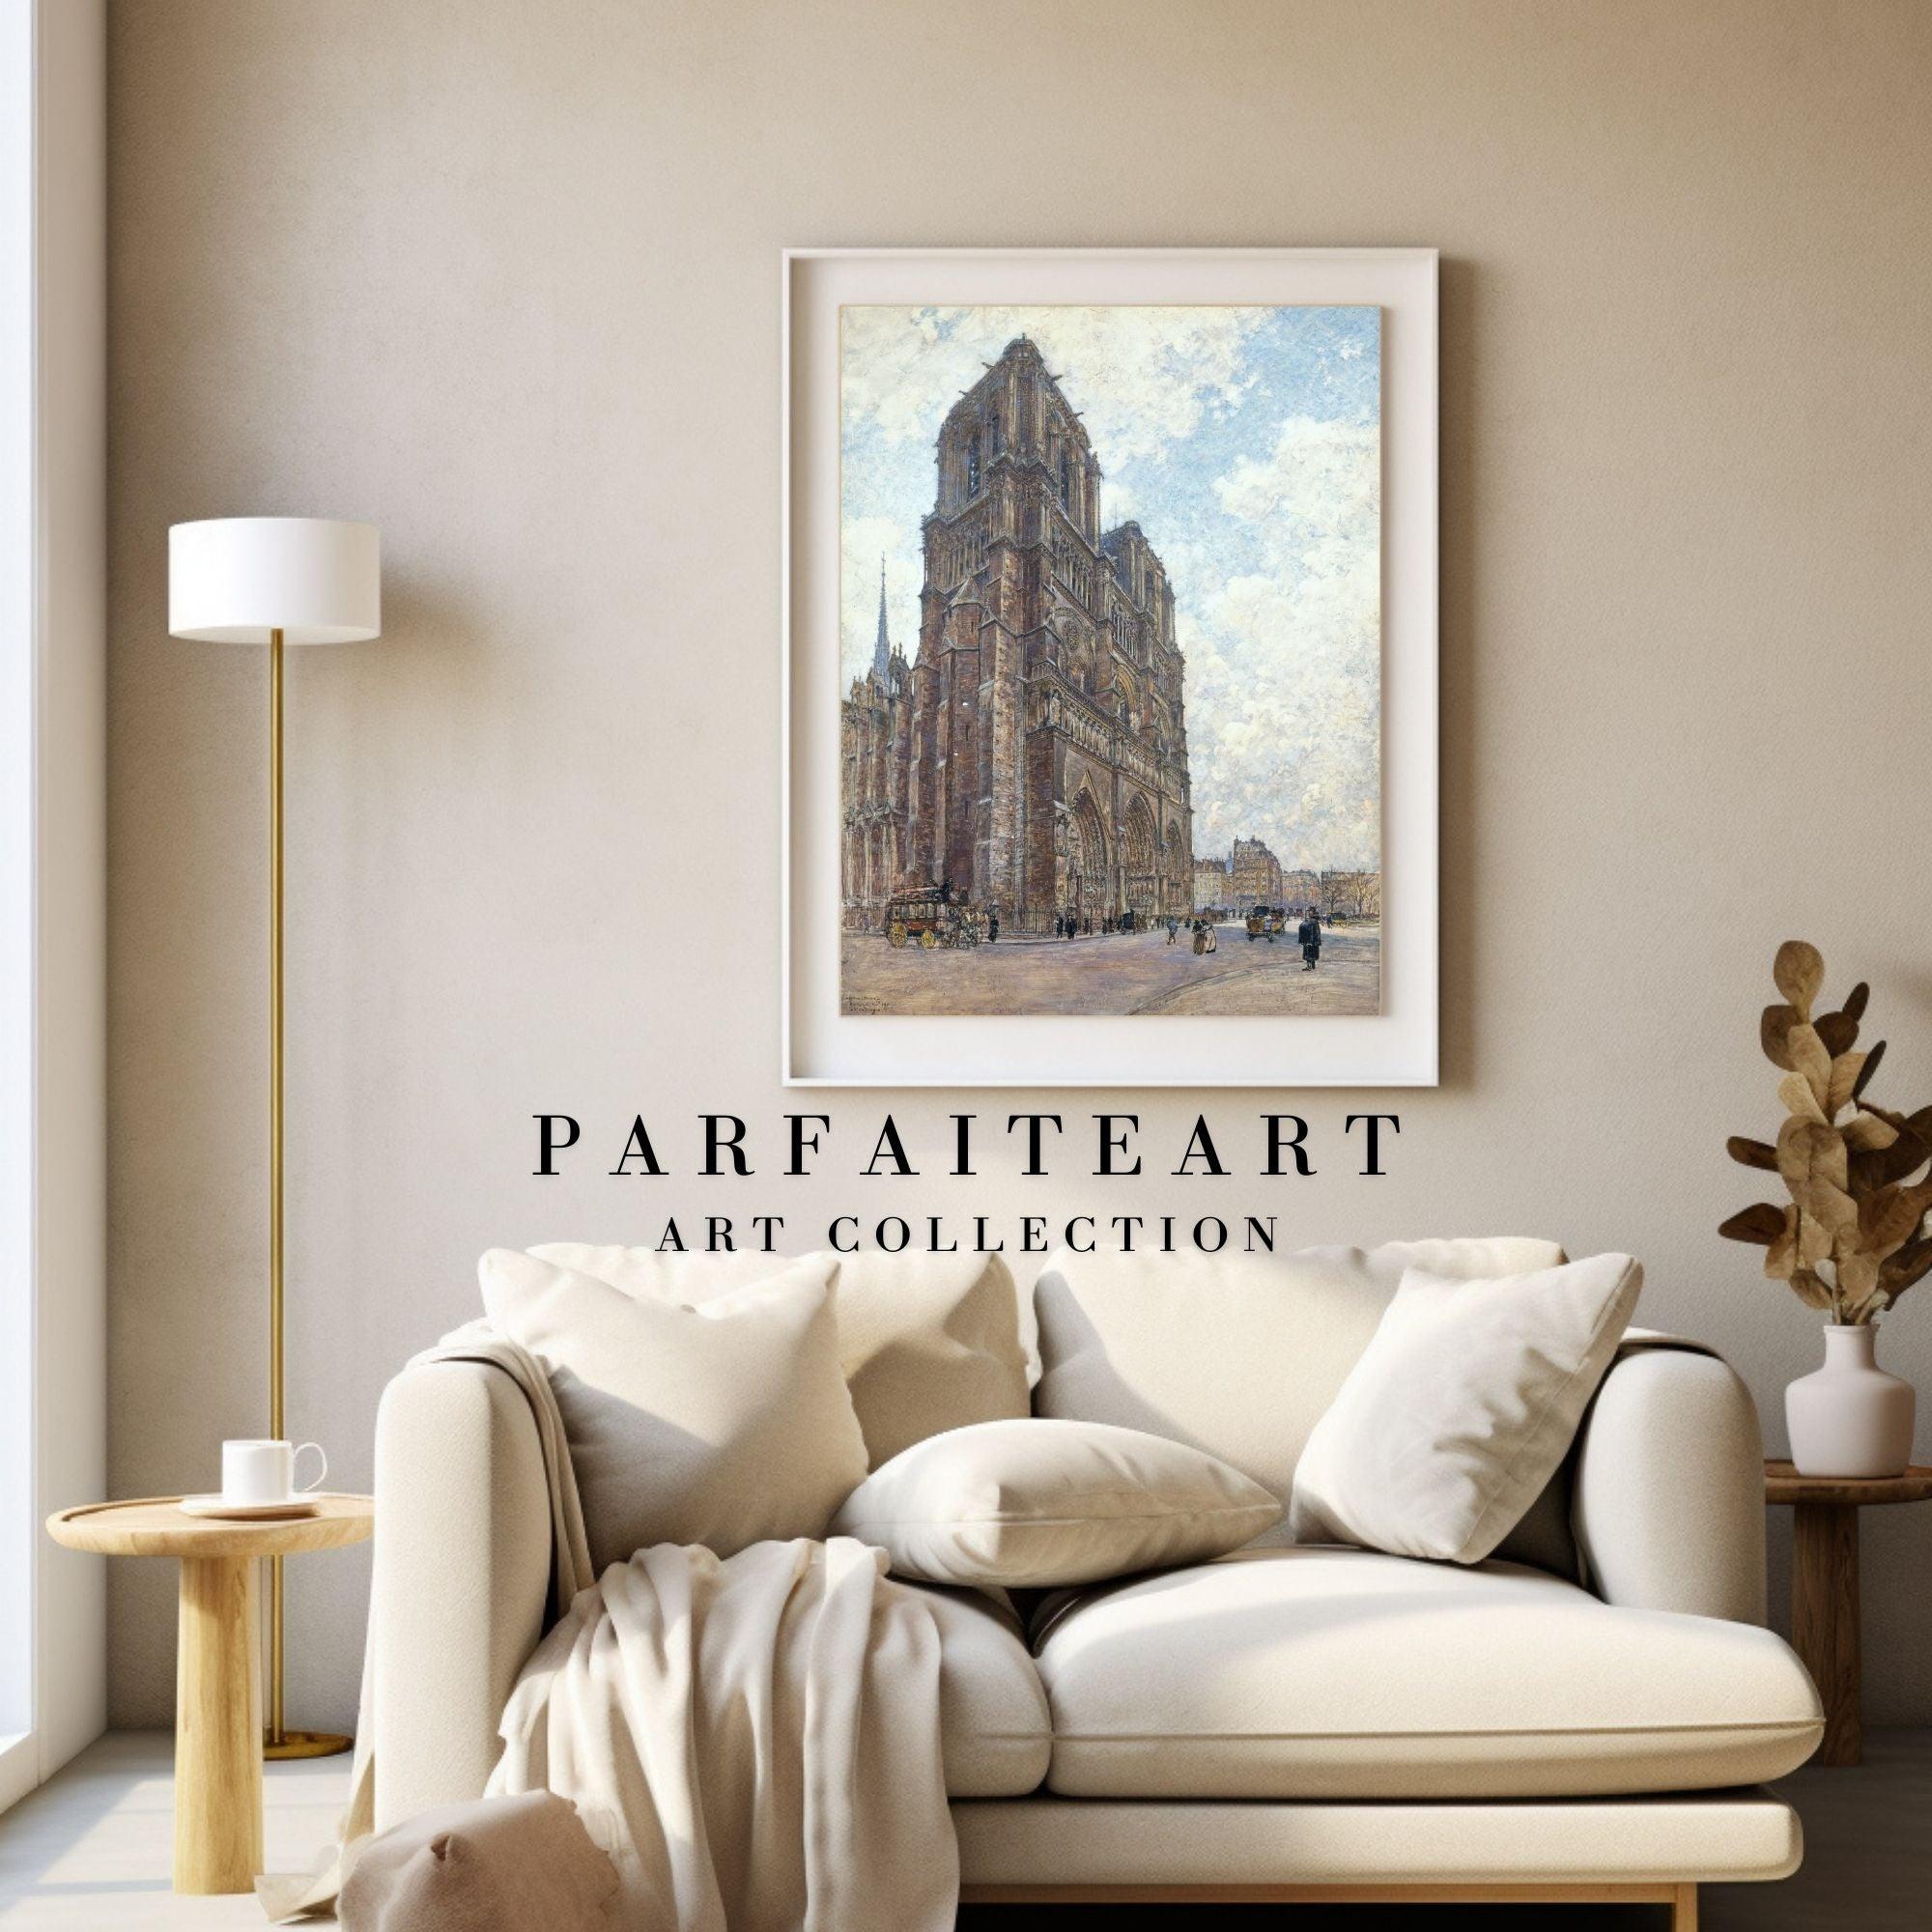 Giclée printed World Famous Paintings, Realistic Artworks and Architectural Landscapes on Printable Canvas #71